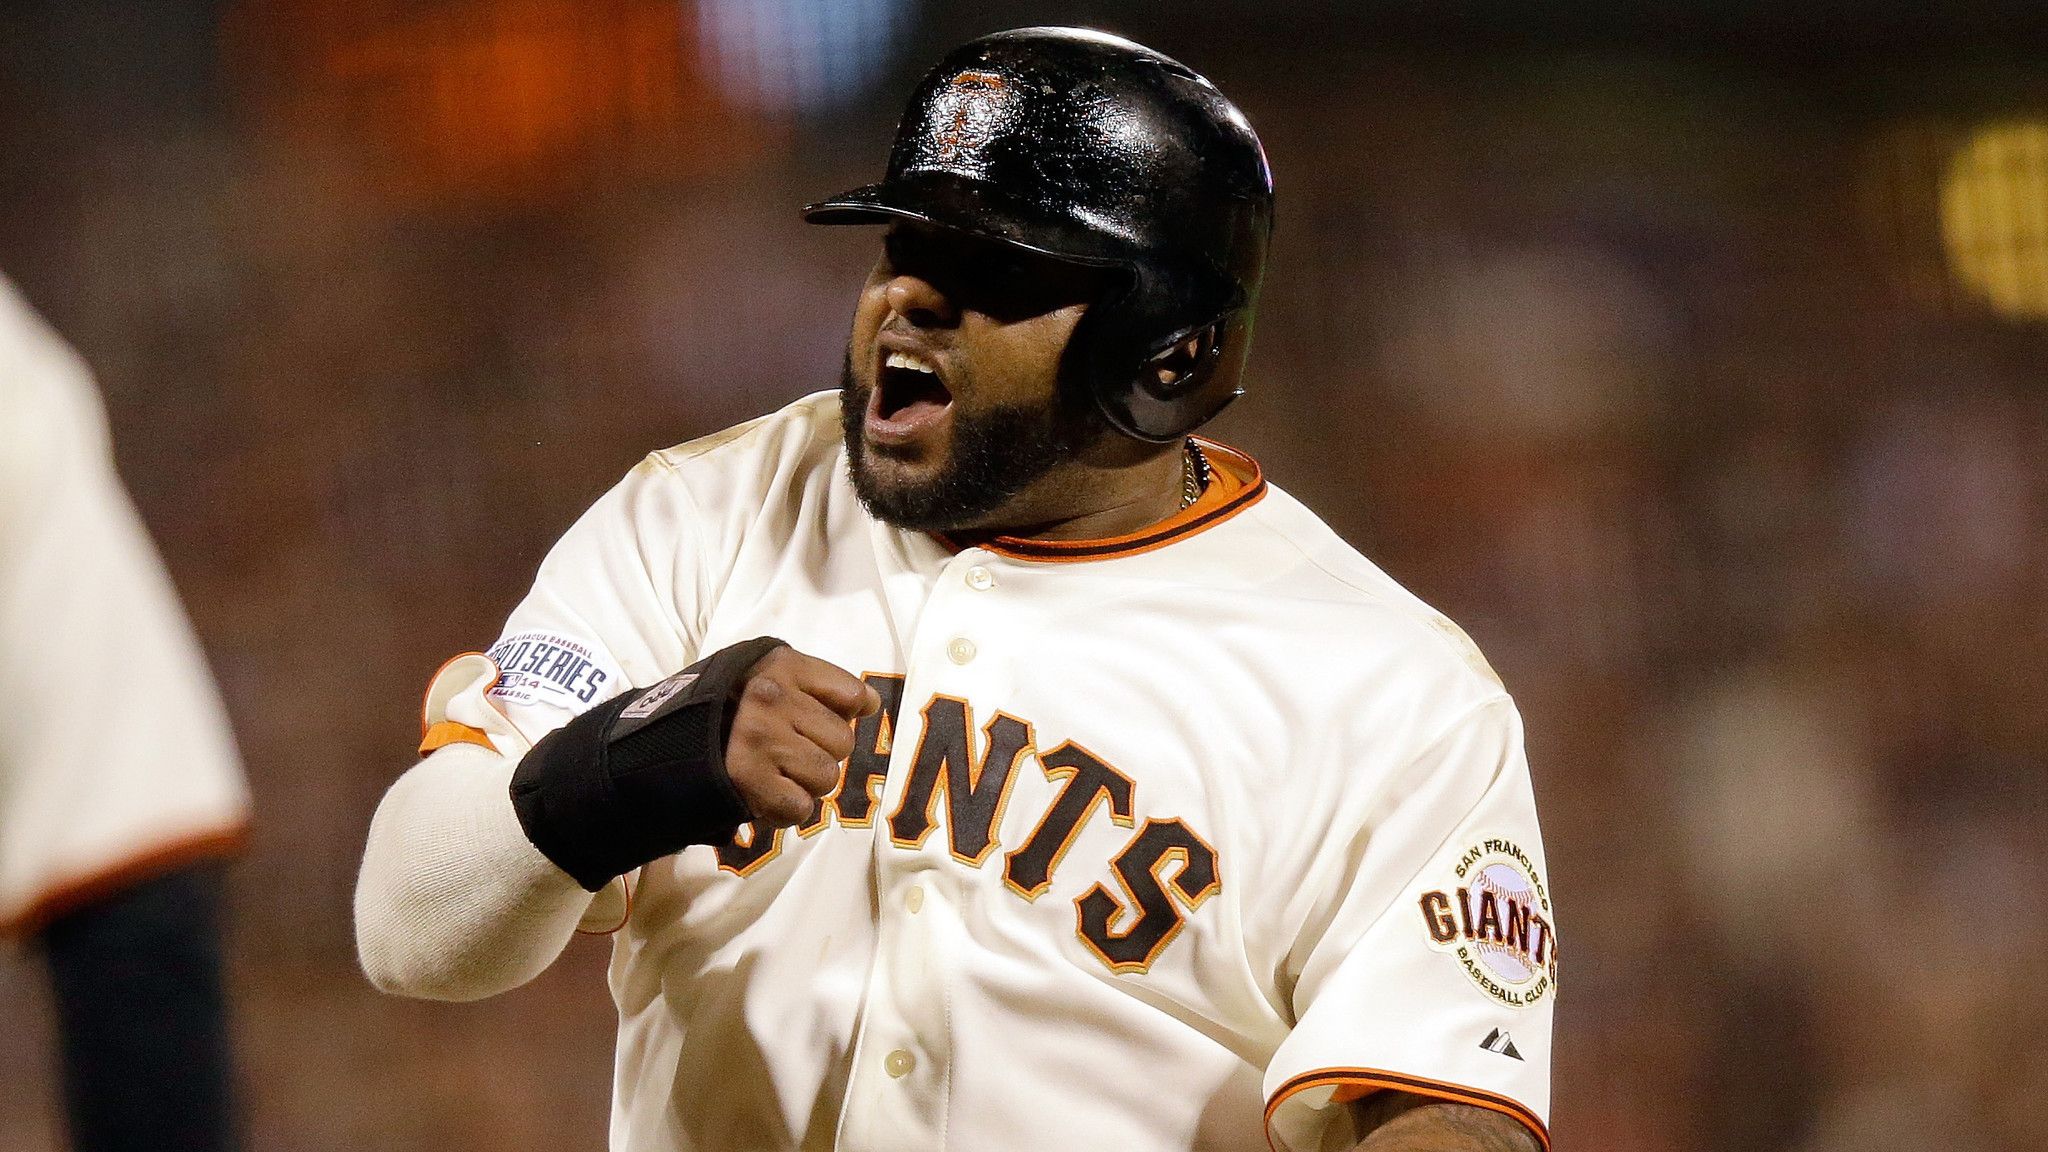 Pablo Sandoval looks like Pablo Sandoval in first Red Sox